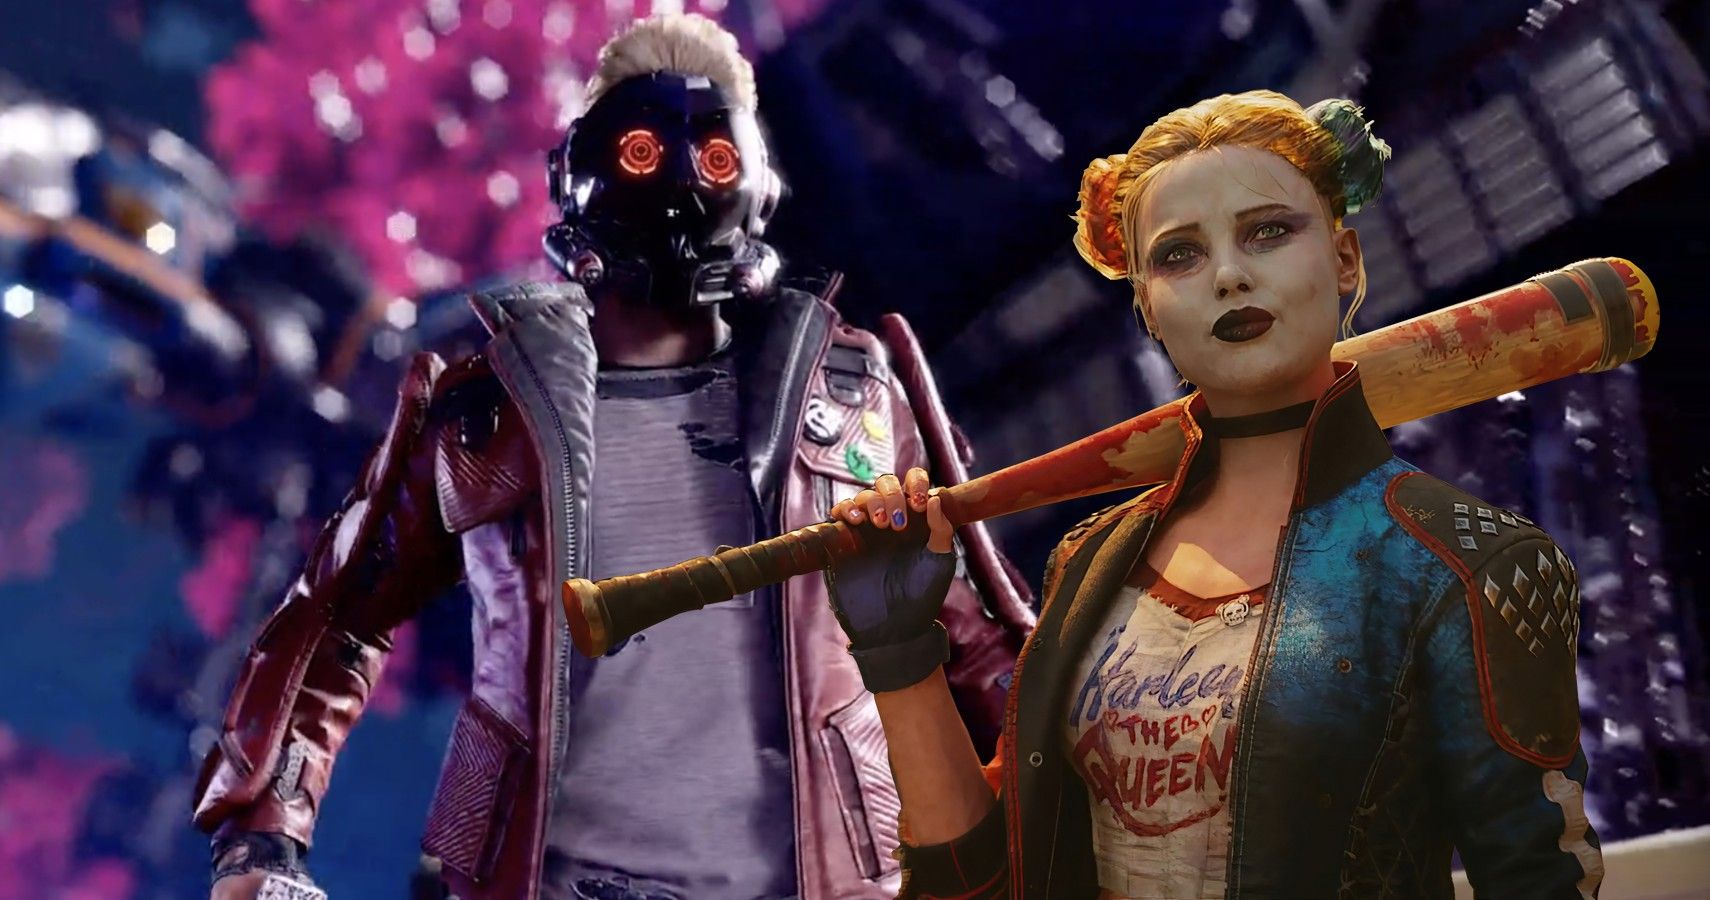 Guardians Of The Galaxy Meets Suicide Squad Makes Way More Sense As A Game